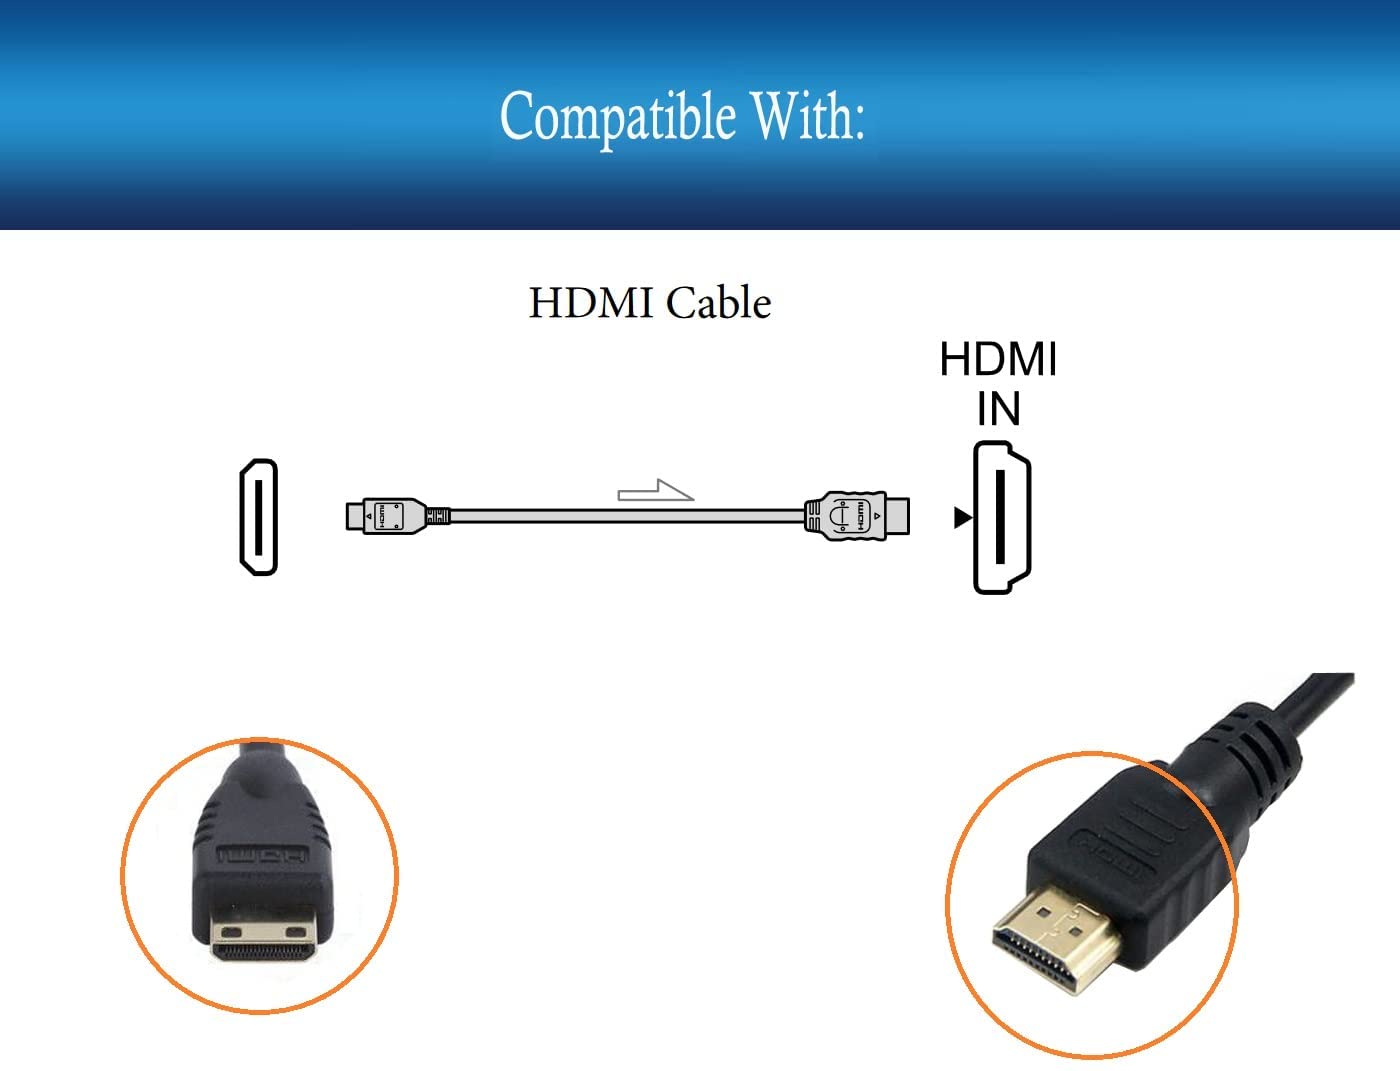 UpBright Mini HDMI Audio Video HDTV Cable Cord Compatible with ICOO D90Pro Android Dual Core WI-FI Tablet PC - image 3 of 5